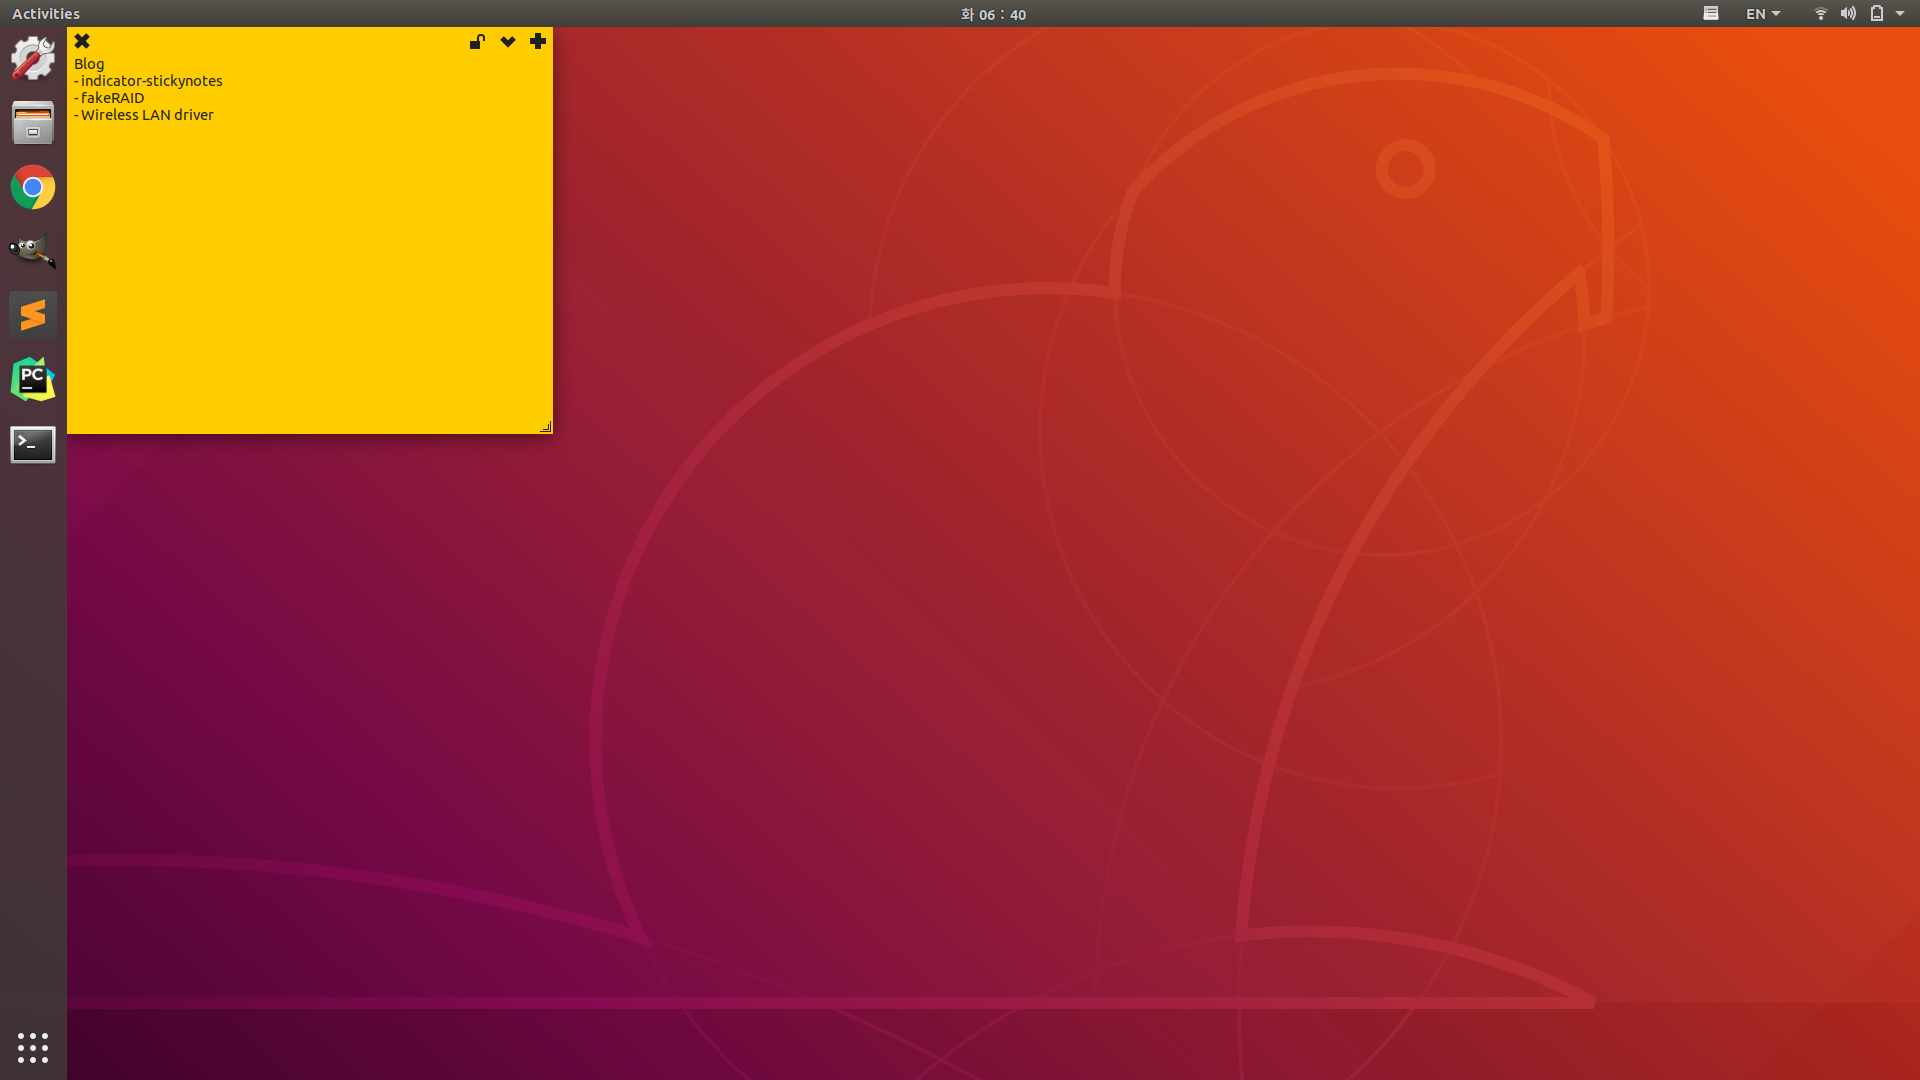 installed_indicator-stickynotes